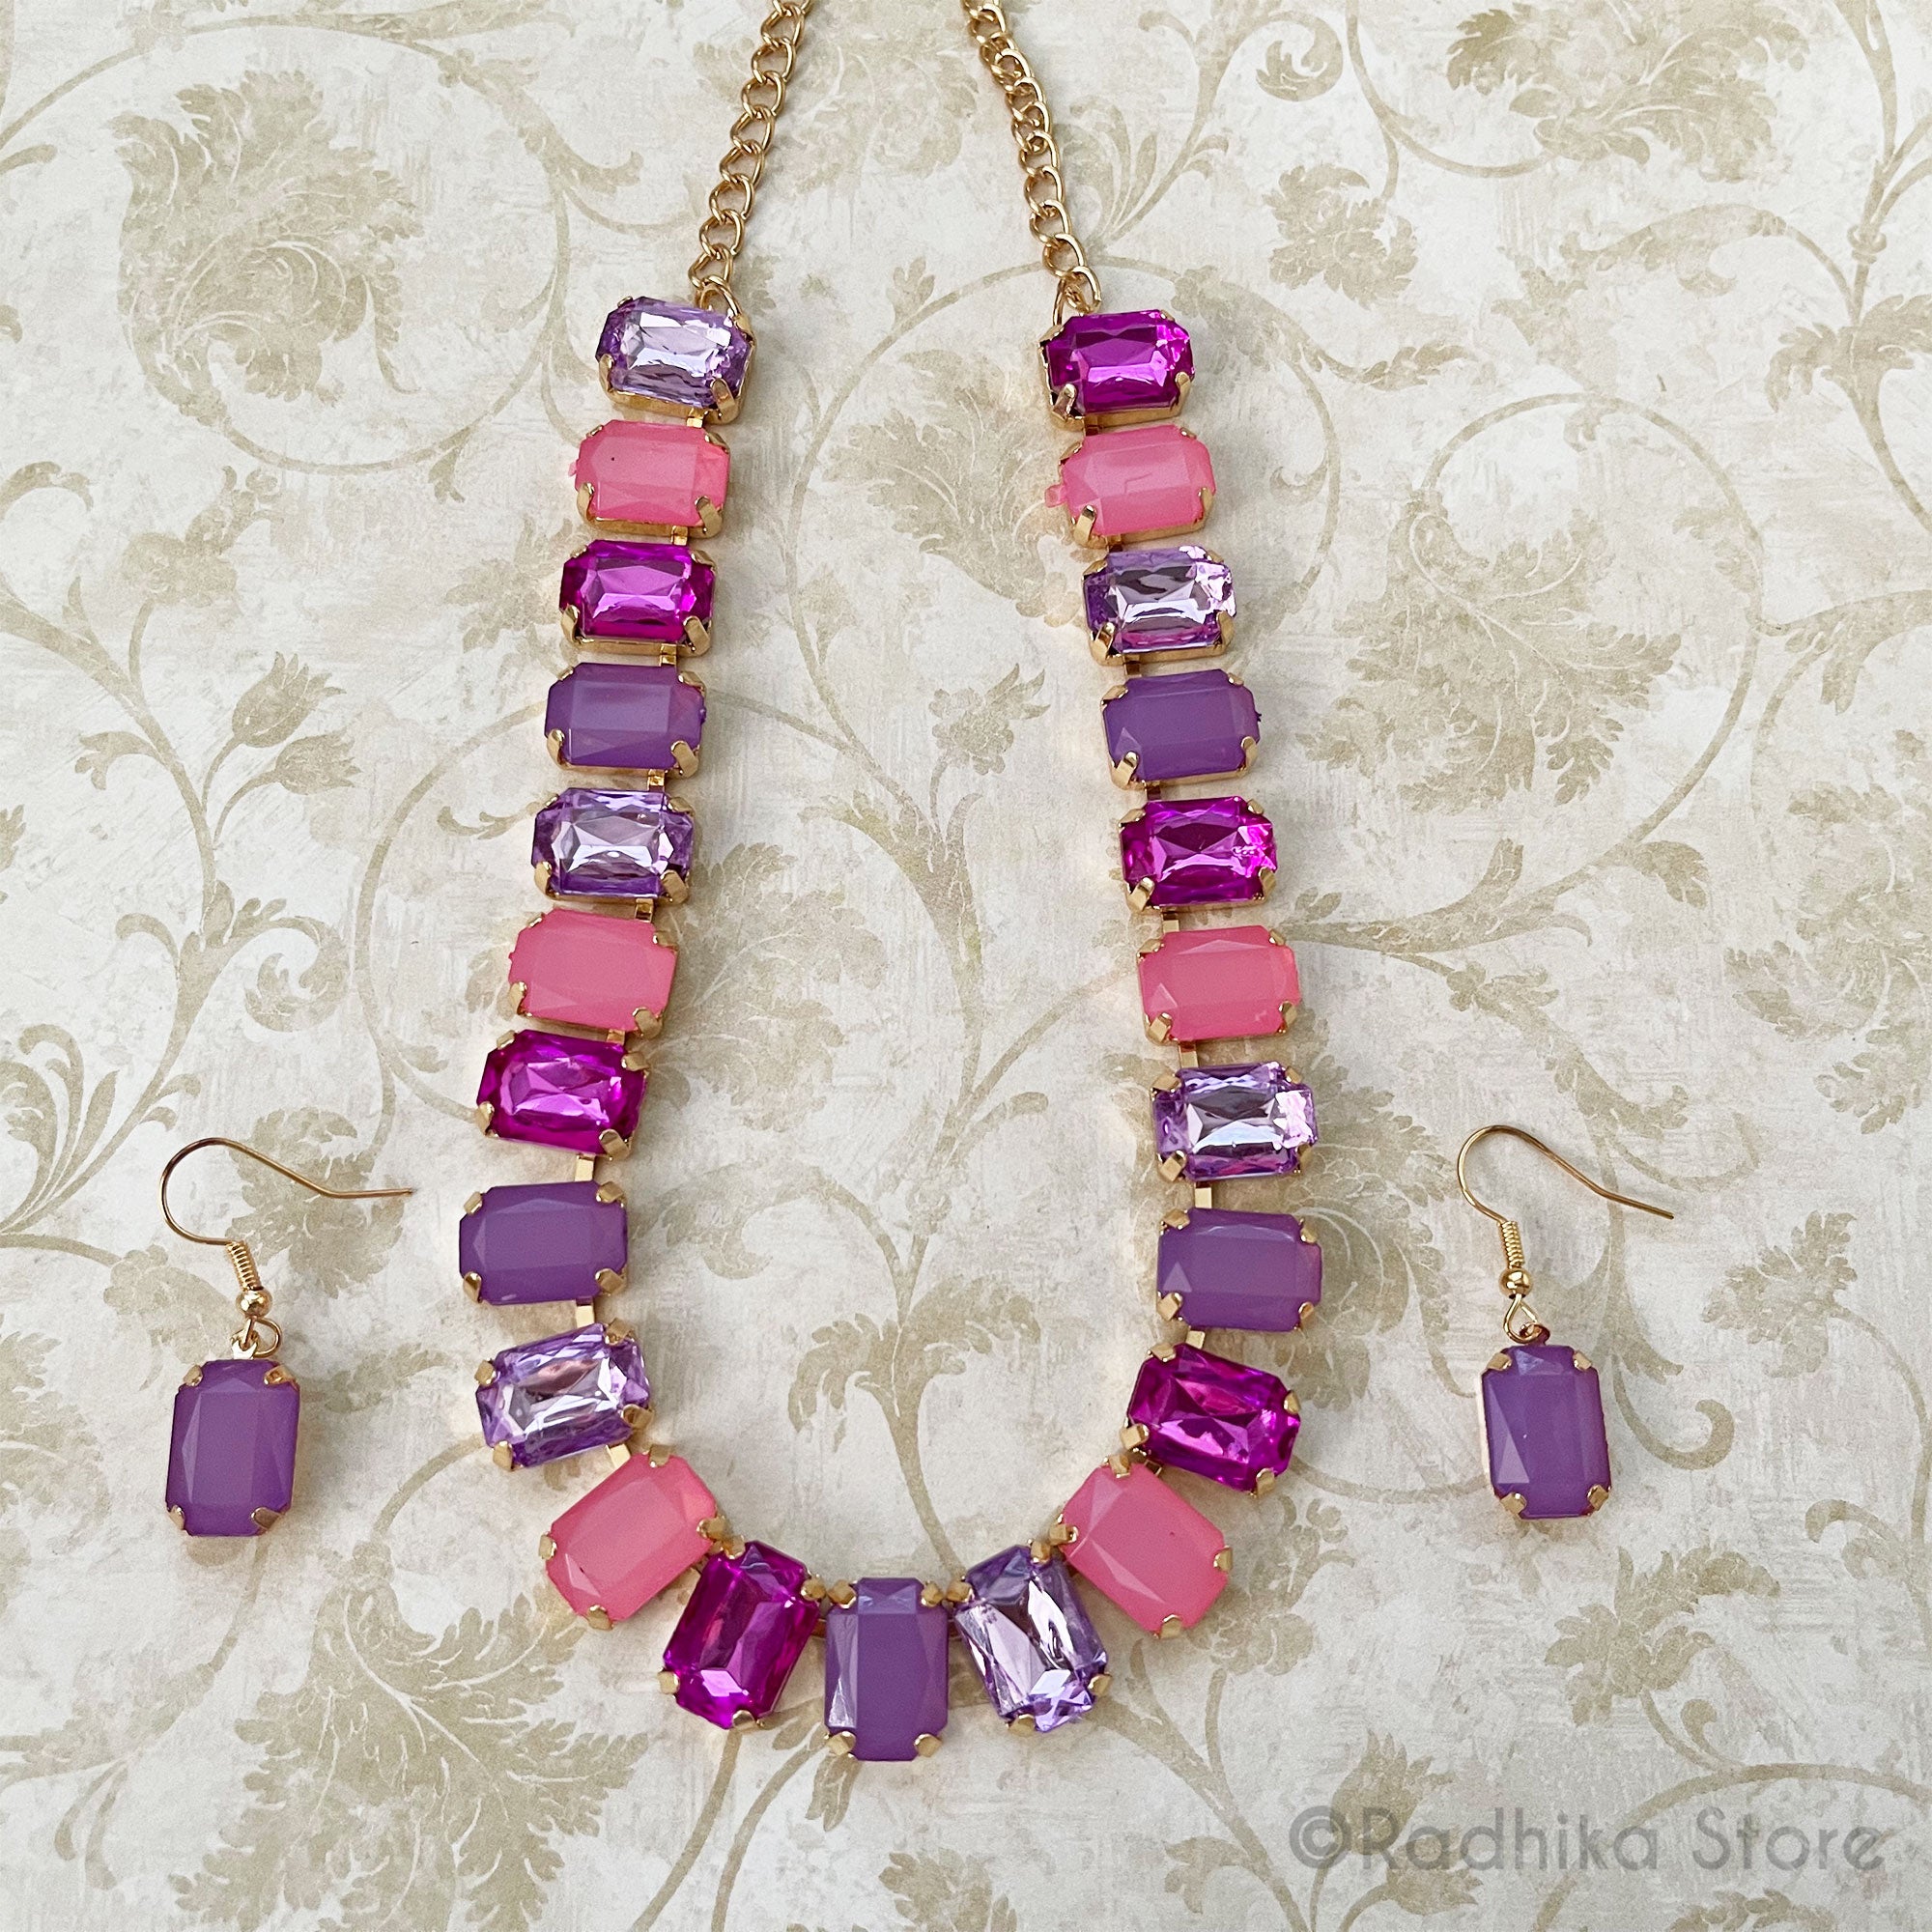 Emerald Cut Pinks and Purples - Rhinestone Deity Necklace - And Earring Set